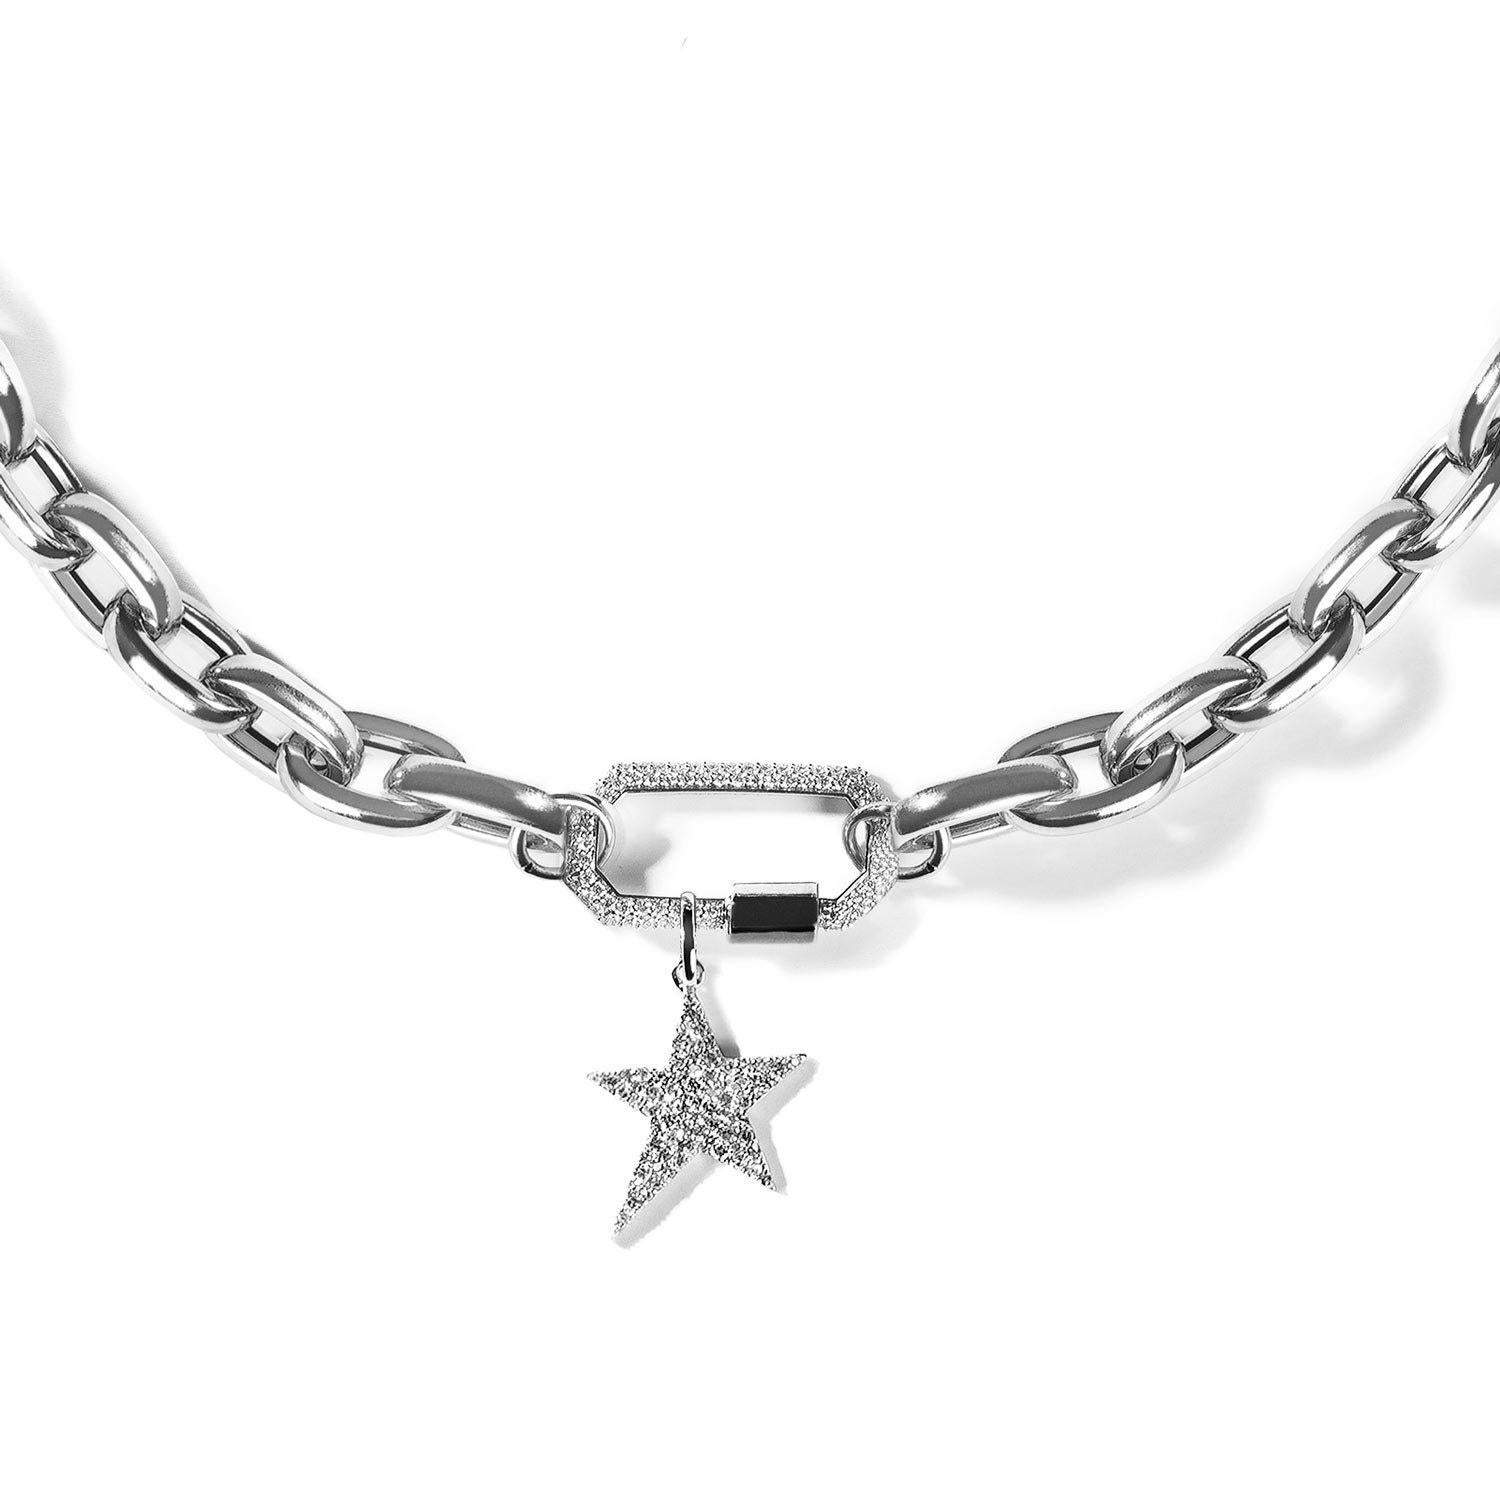 Dream of the night sky with our Diamond Lock and Pave Star Necklace.

Crafted in solid 18k white and black gold, this necklace is detailed with a star pendant encrusted with dazzling pave white diamonds and our signature pave lock. Paired with your